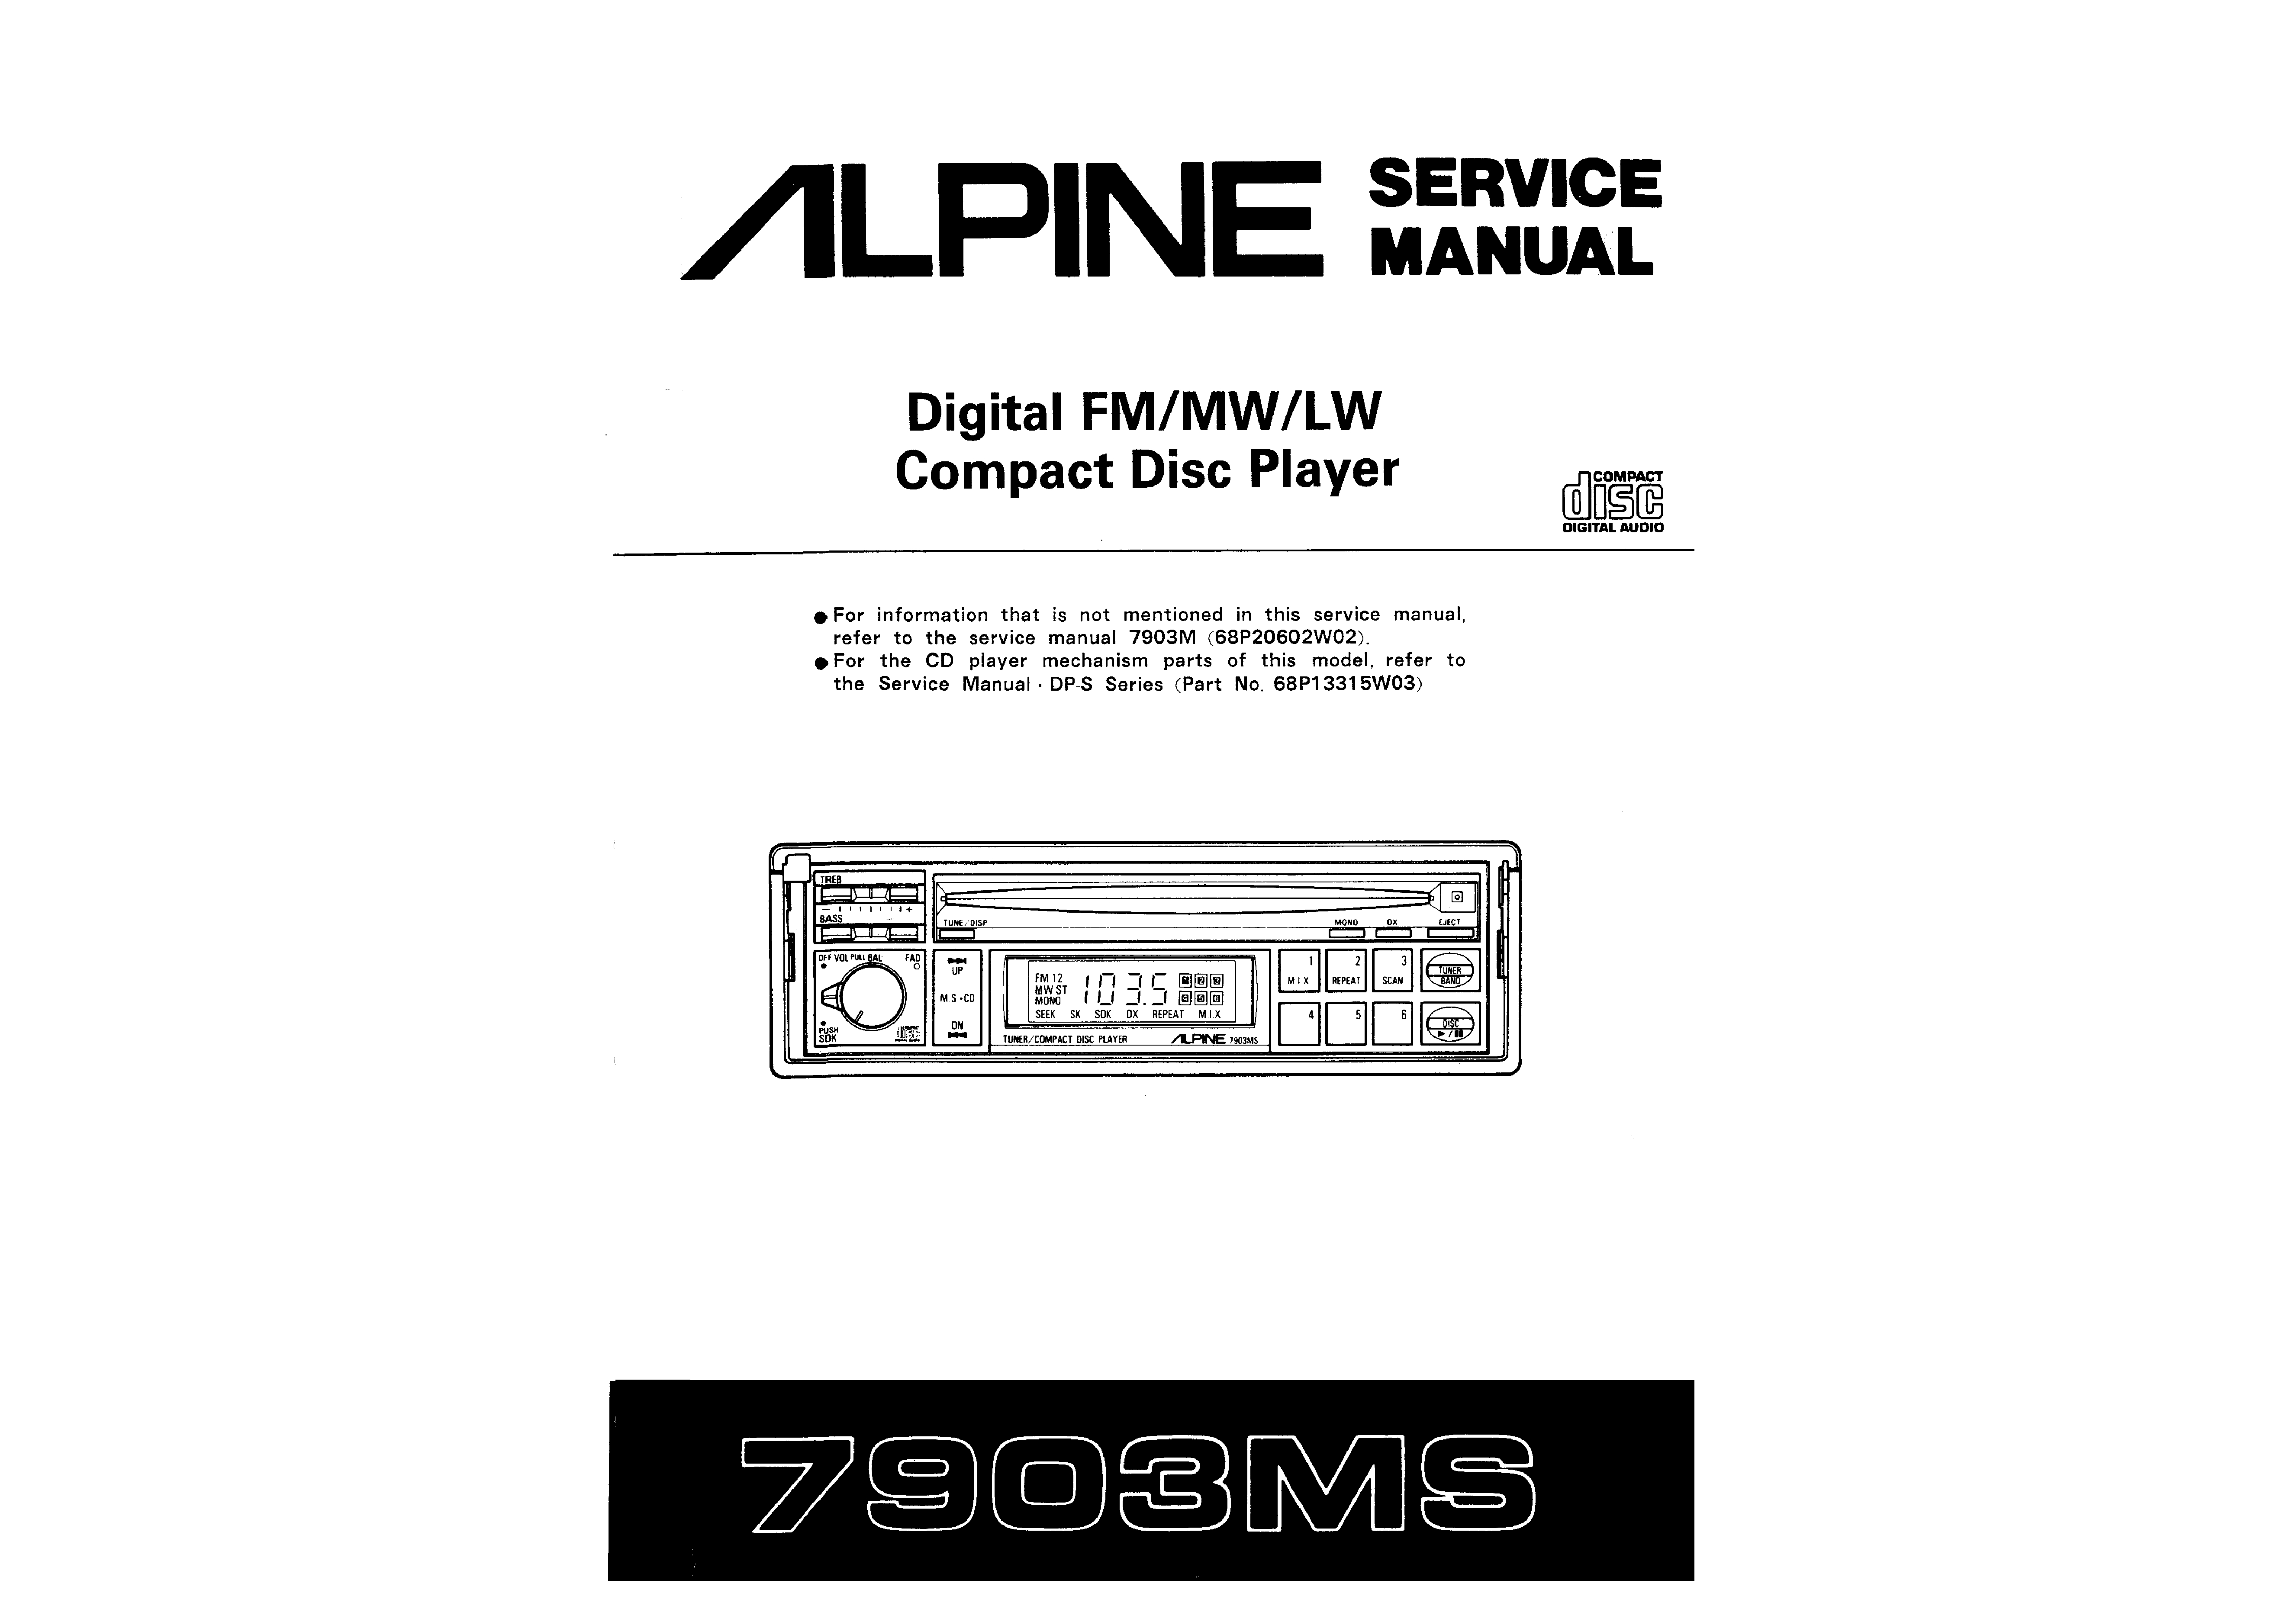 Alpine 7502 manual download for pc